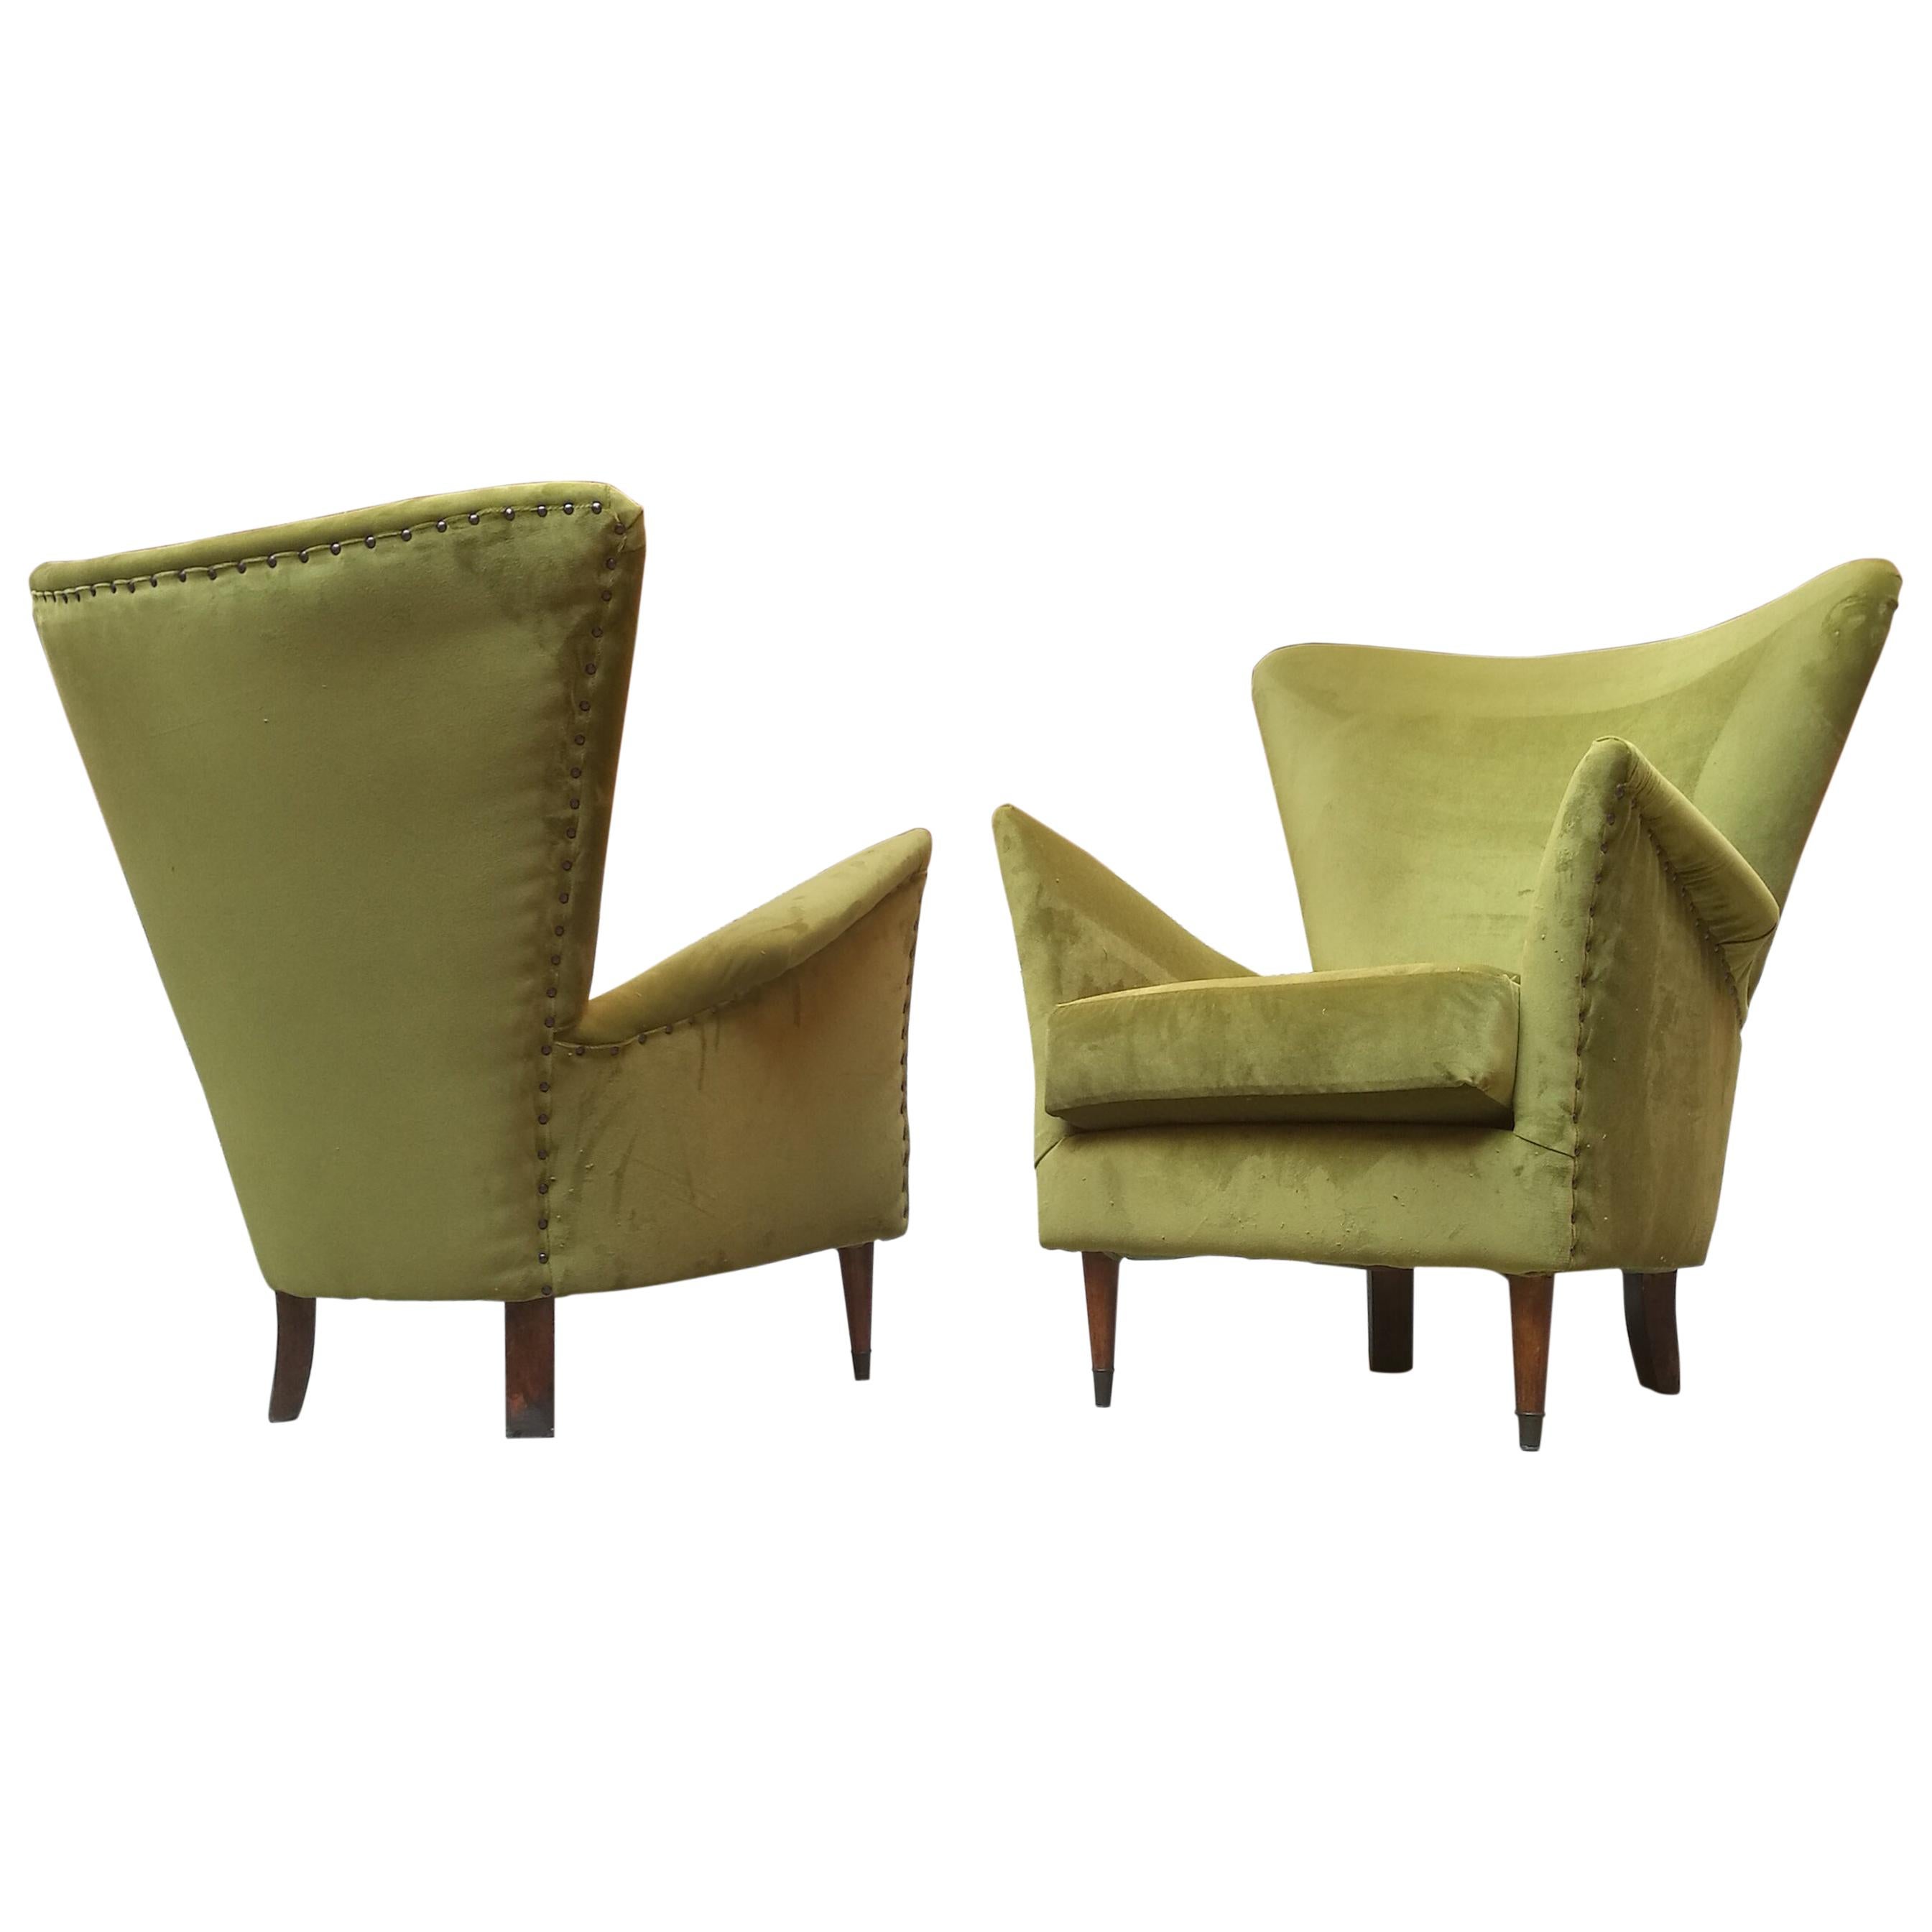 Pair of Italian Armchairs from 1950s